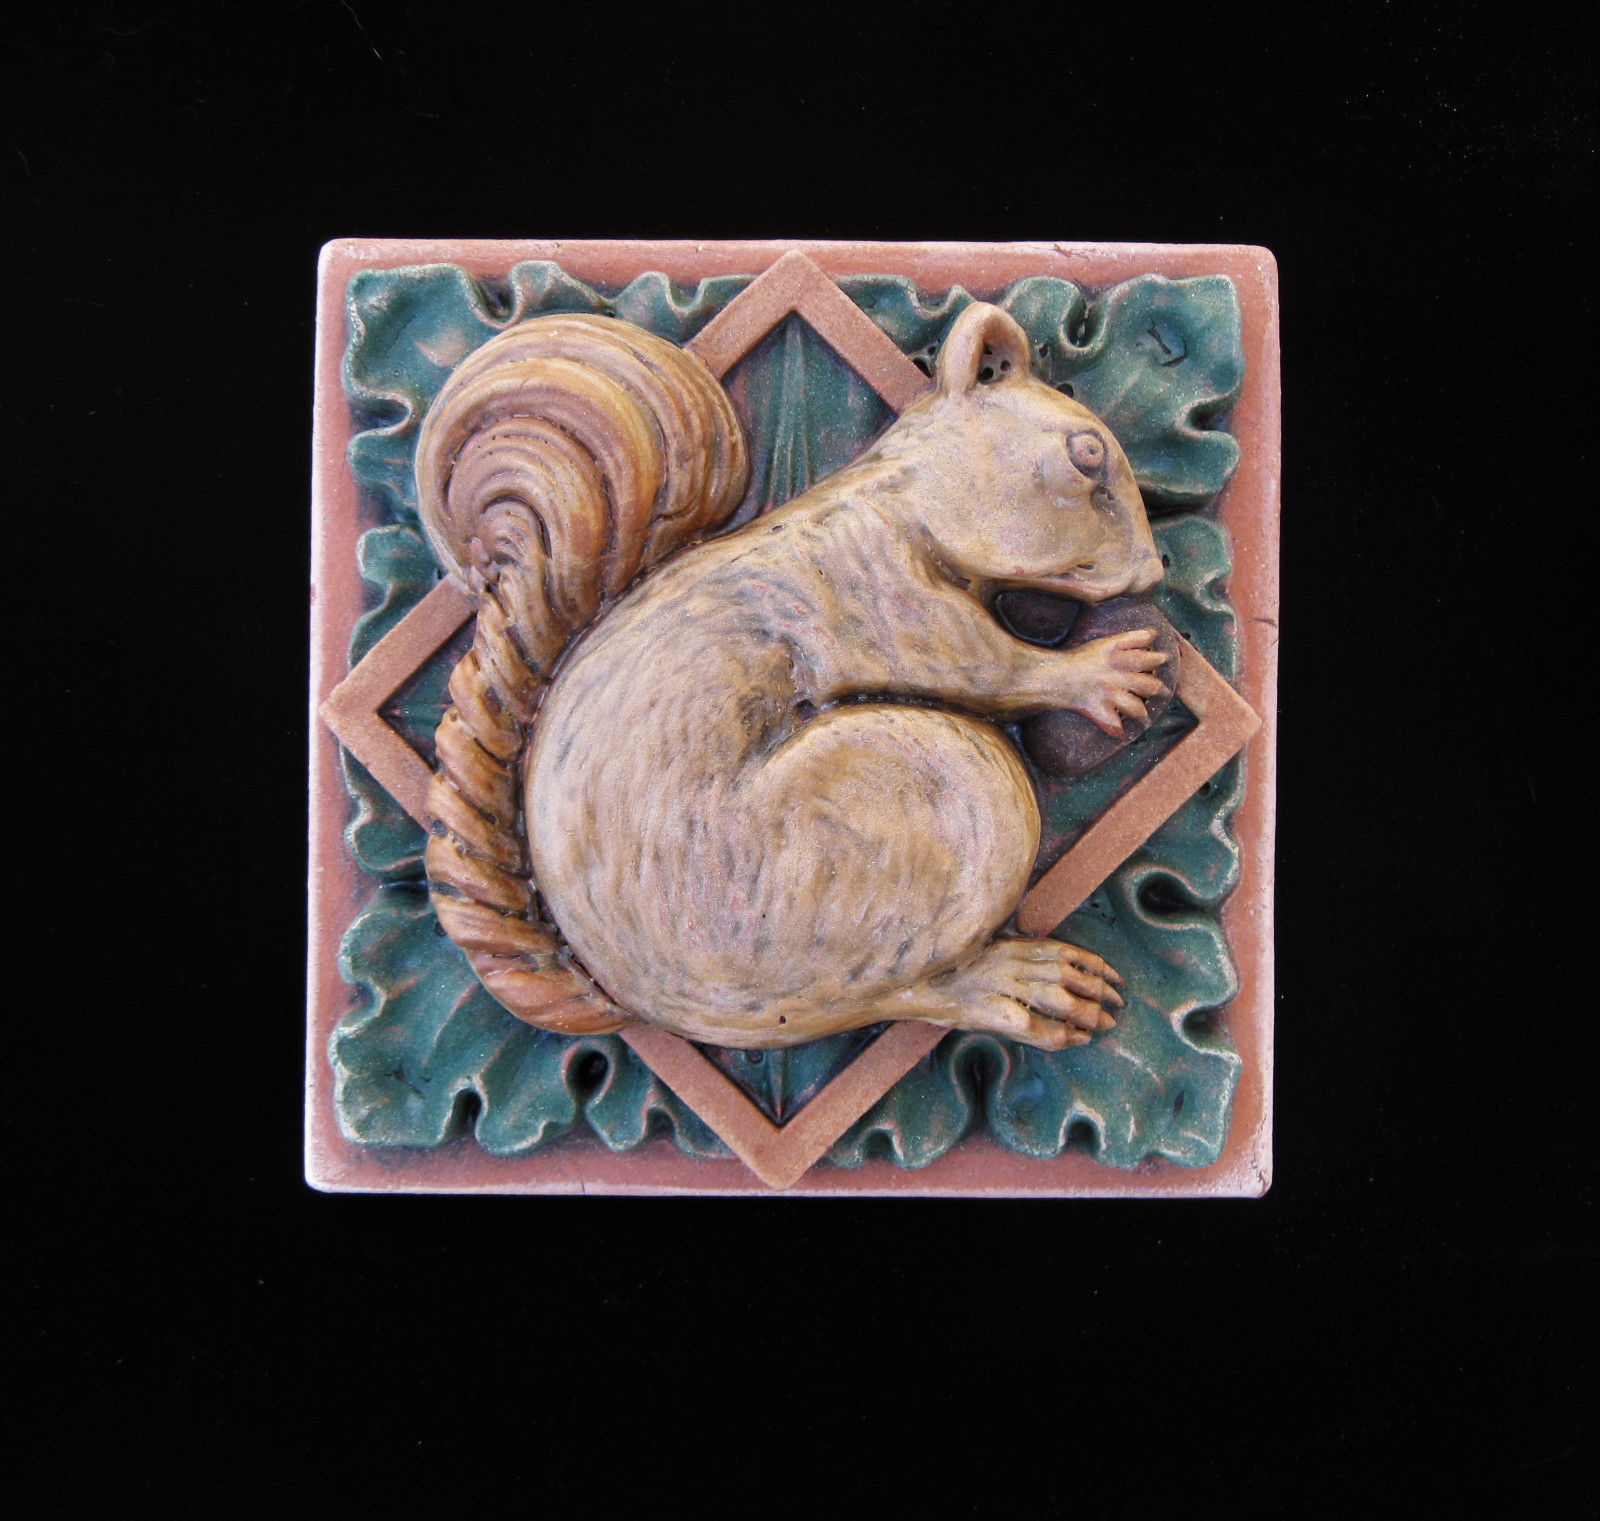 Antique Arts and Crafts Tile